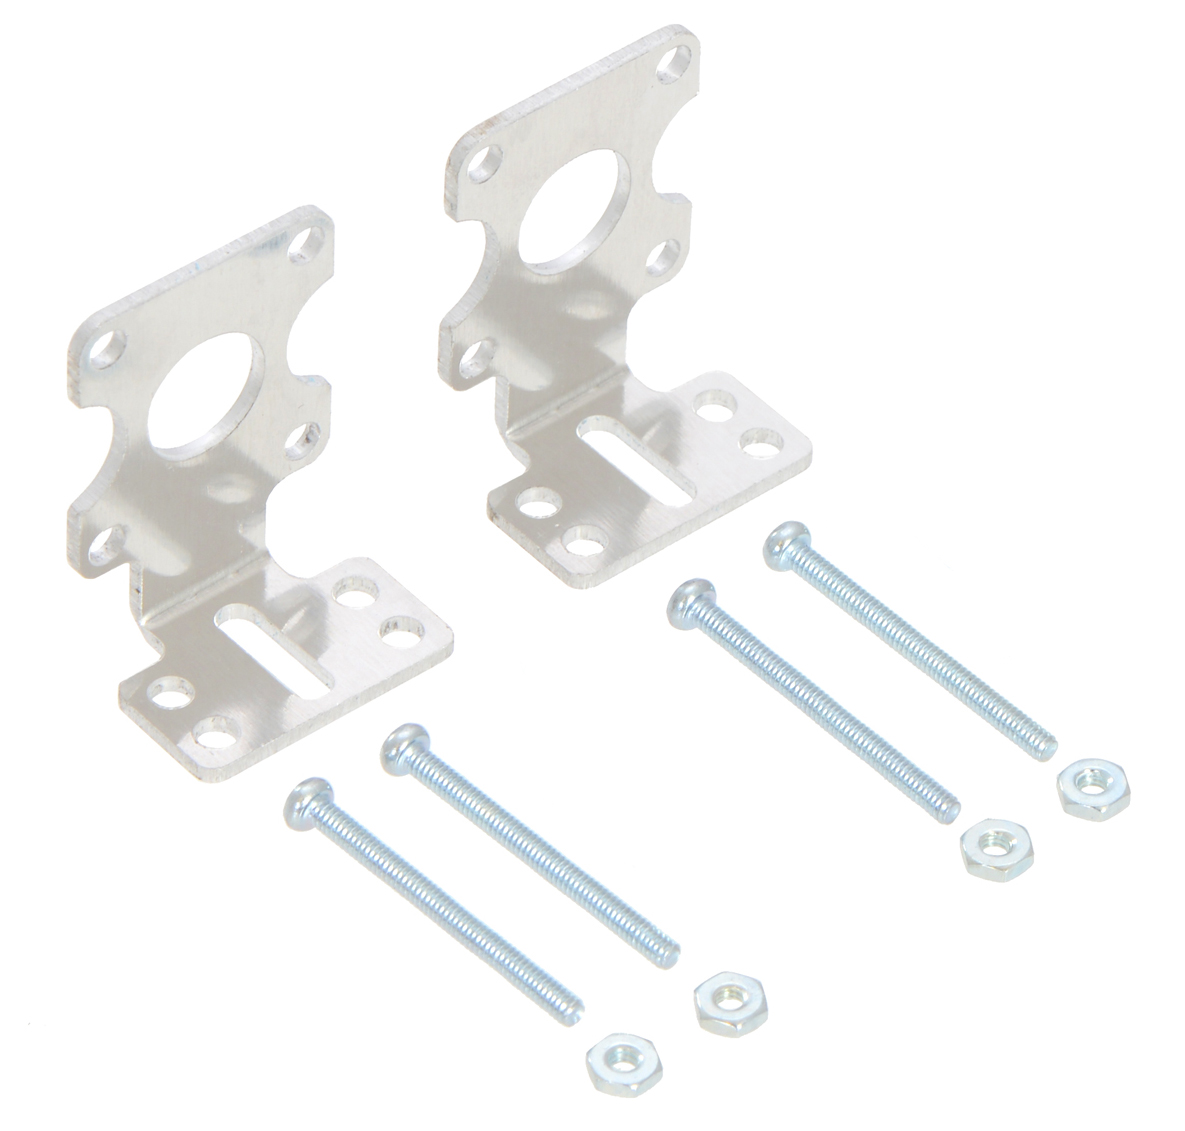 Pololu Extended Stamped Aluminium L Bracket for Plastic